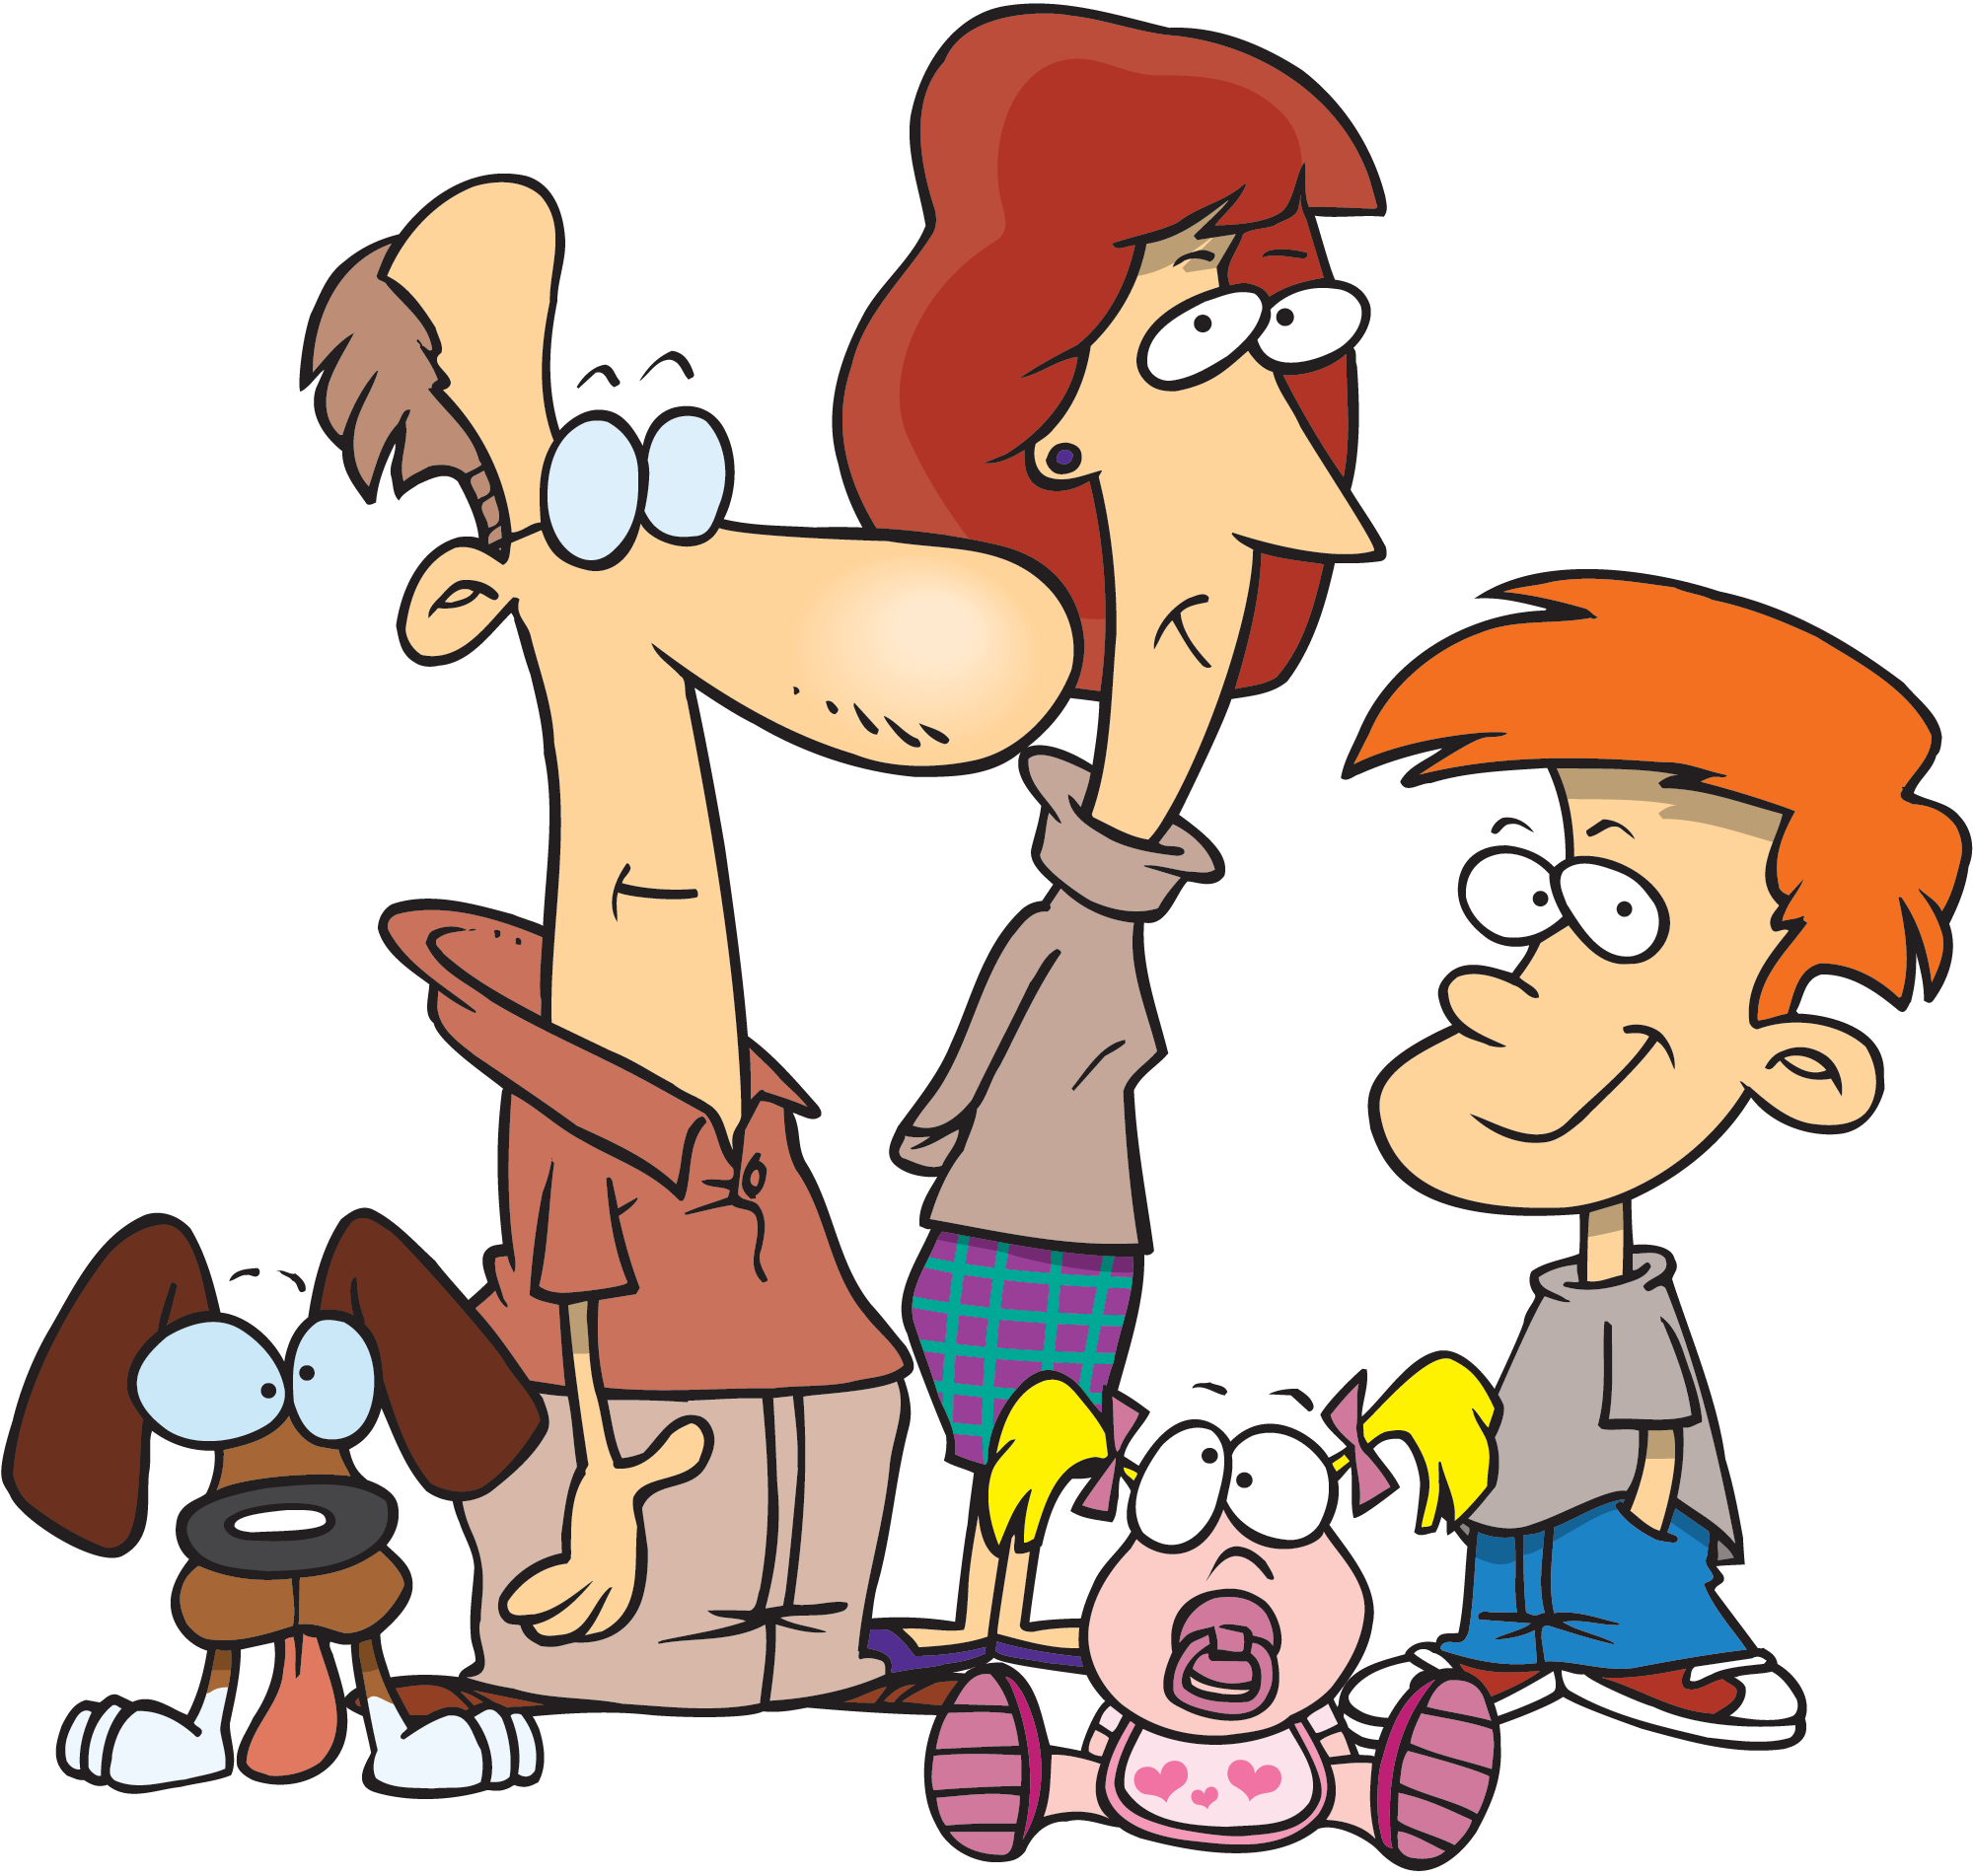 Picture Of A Cartoon Family | Free Download Clip Art | Free Clip ...